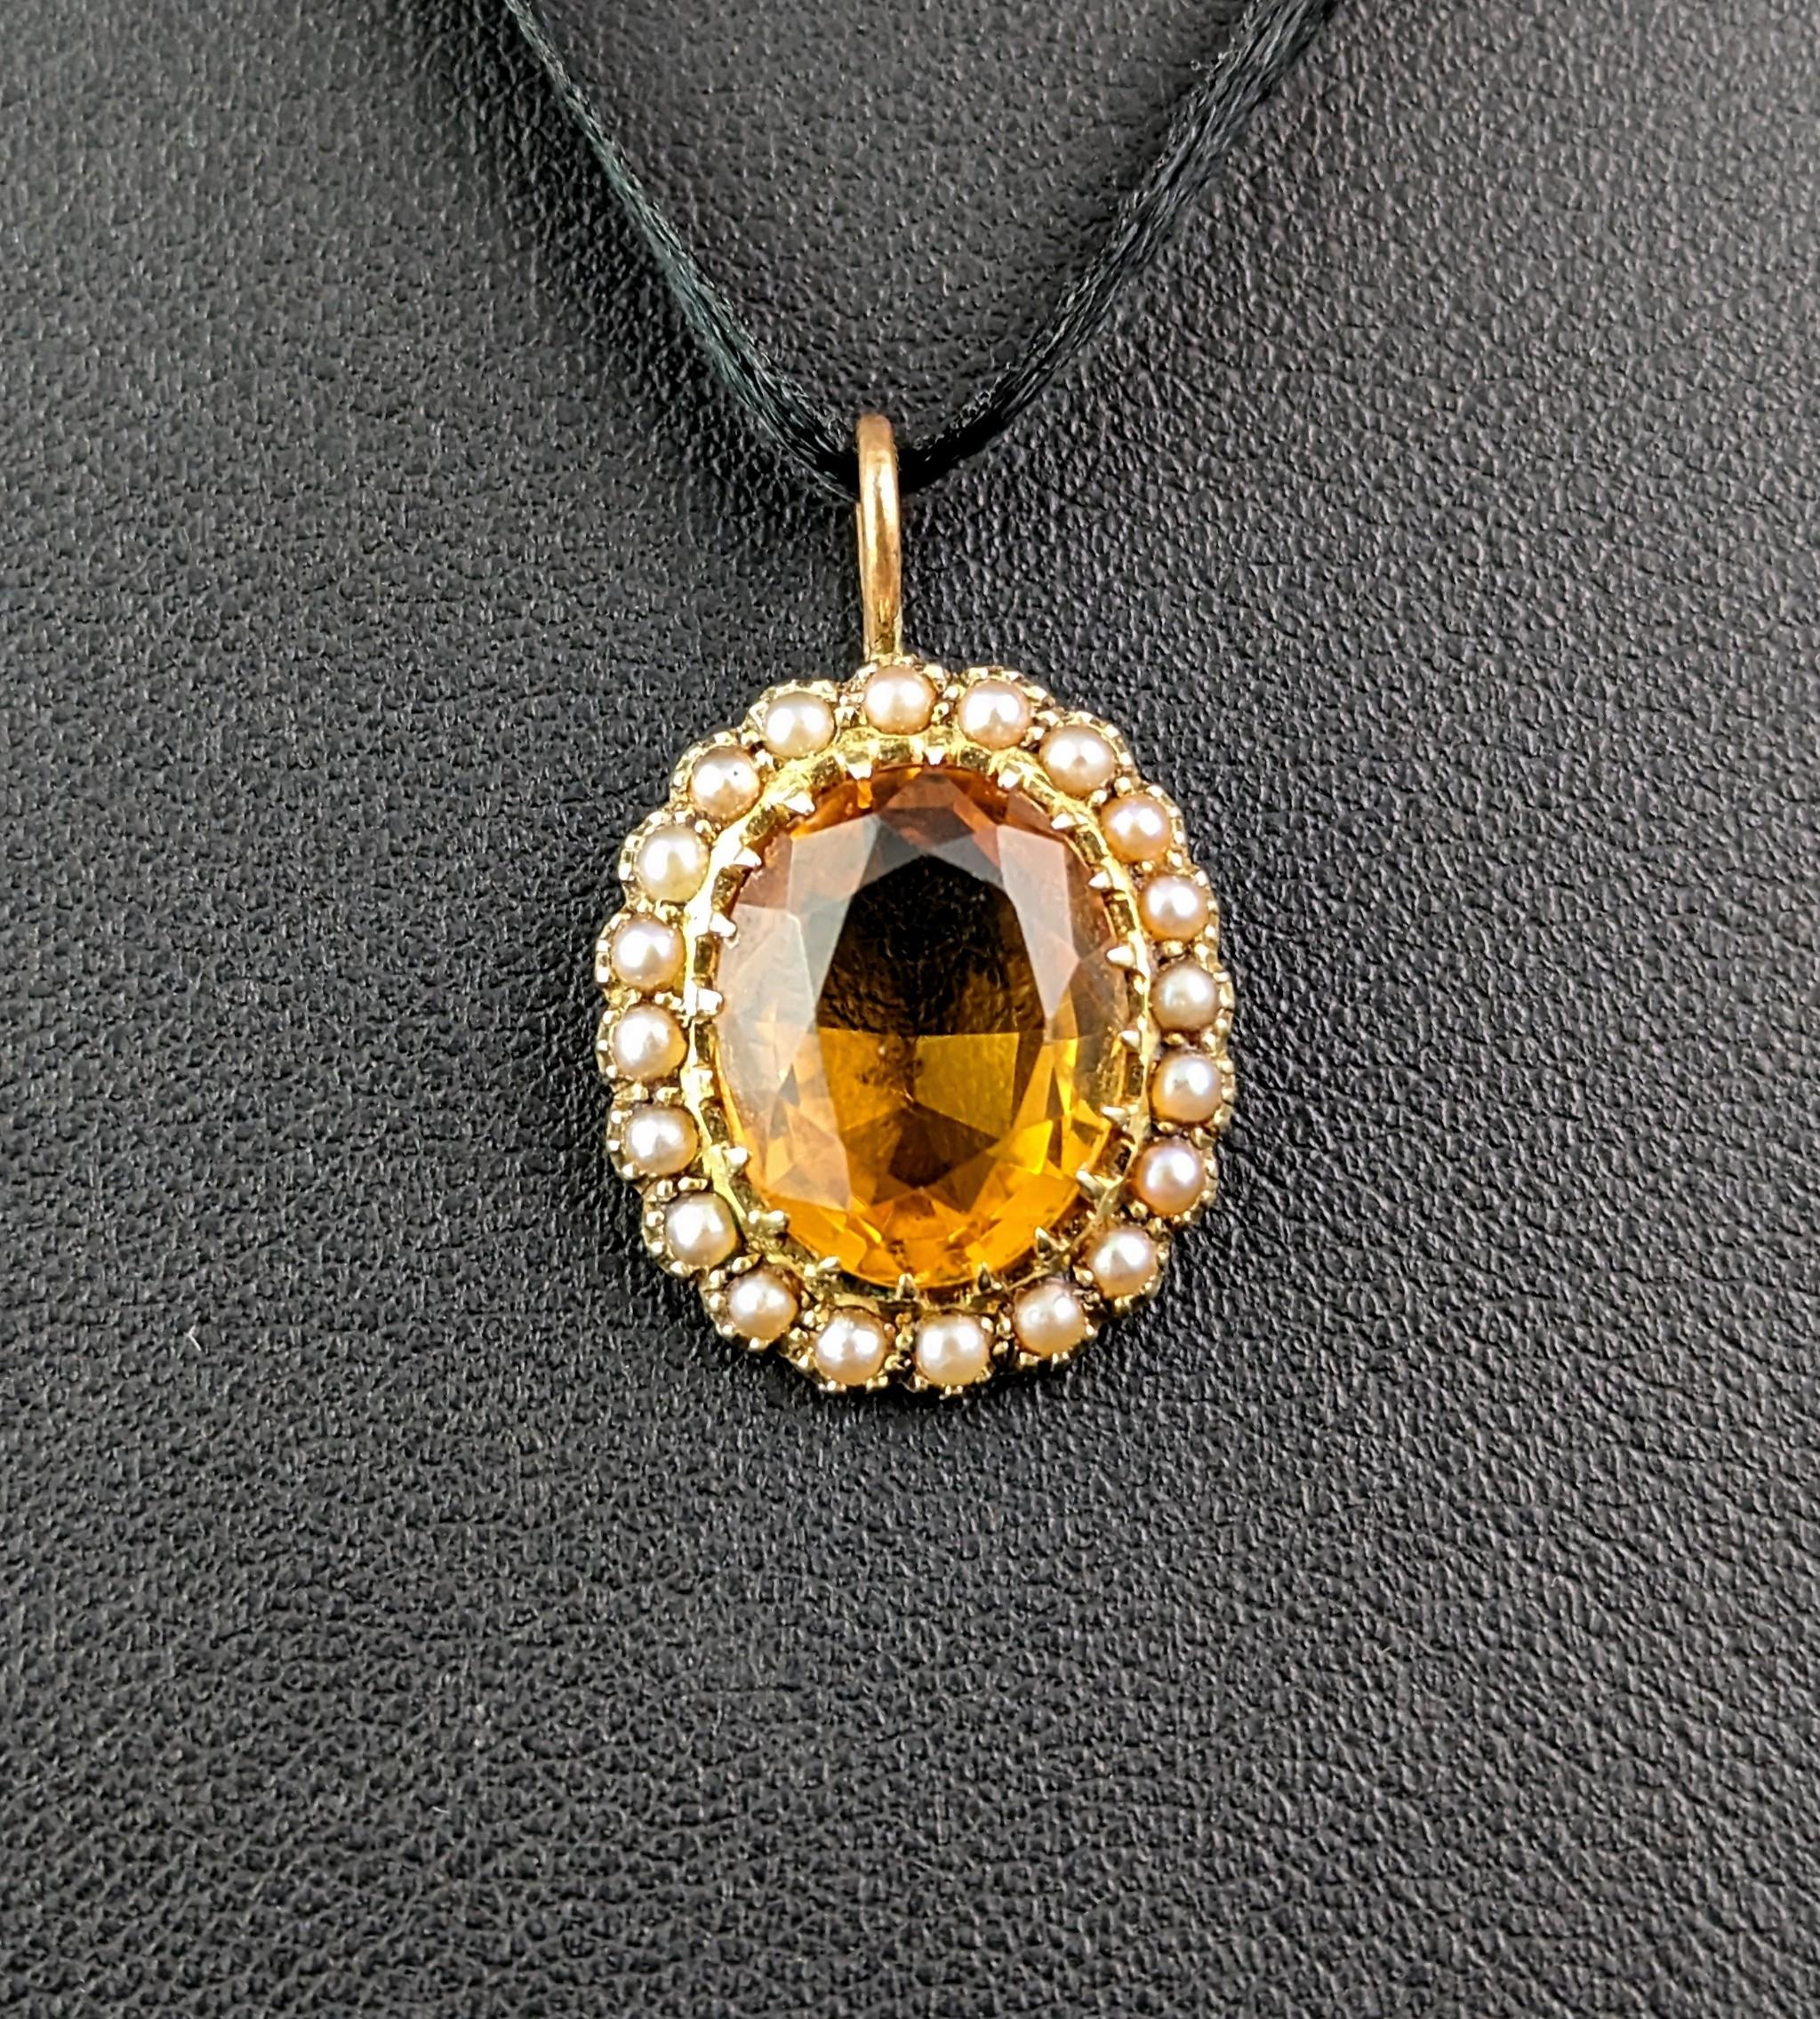 This wonderful little antique citrine and pearl pendant is such a warm and elegant piece.

The rich cognac glow of the antique citrine gives lovely warm vibes and citrine is thought to promote healing and happiness, the lovely faceted oval cut